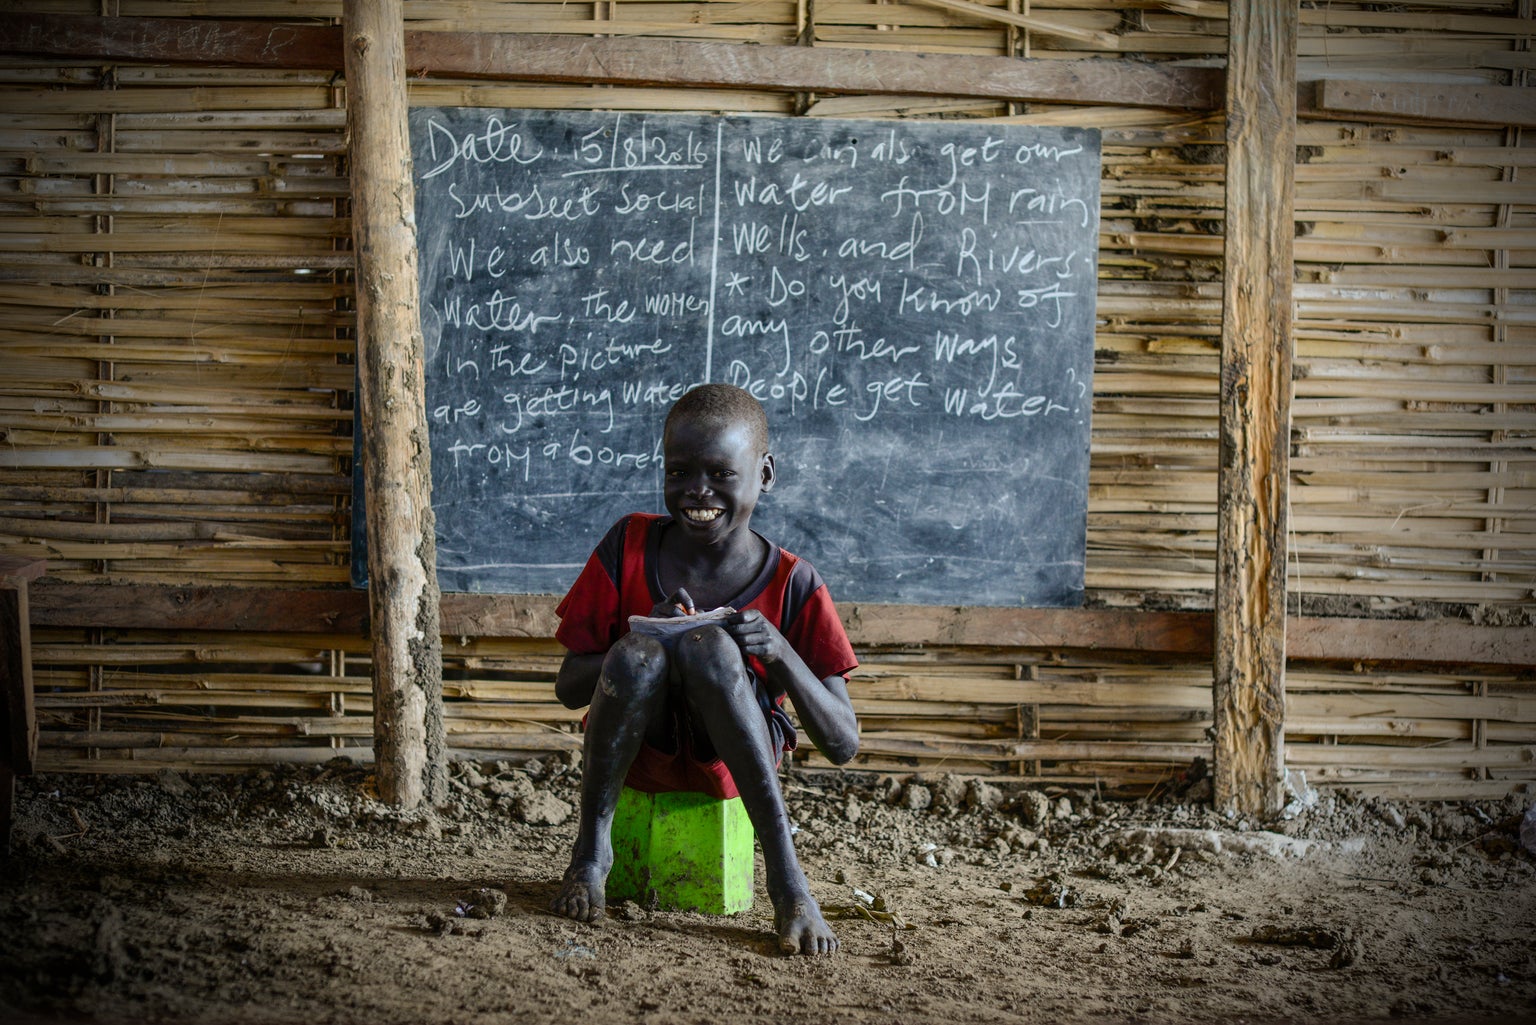 Mawal, 10, brings to school with him the remains of an unknown plastic toy to sit on in class.